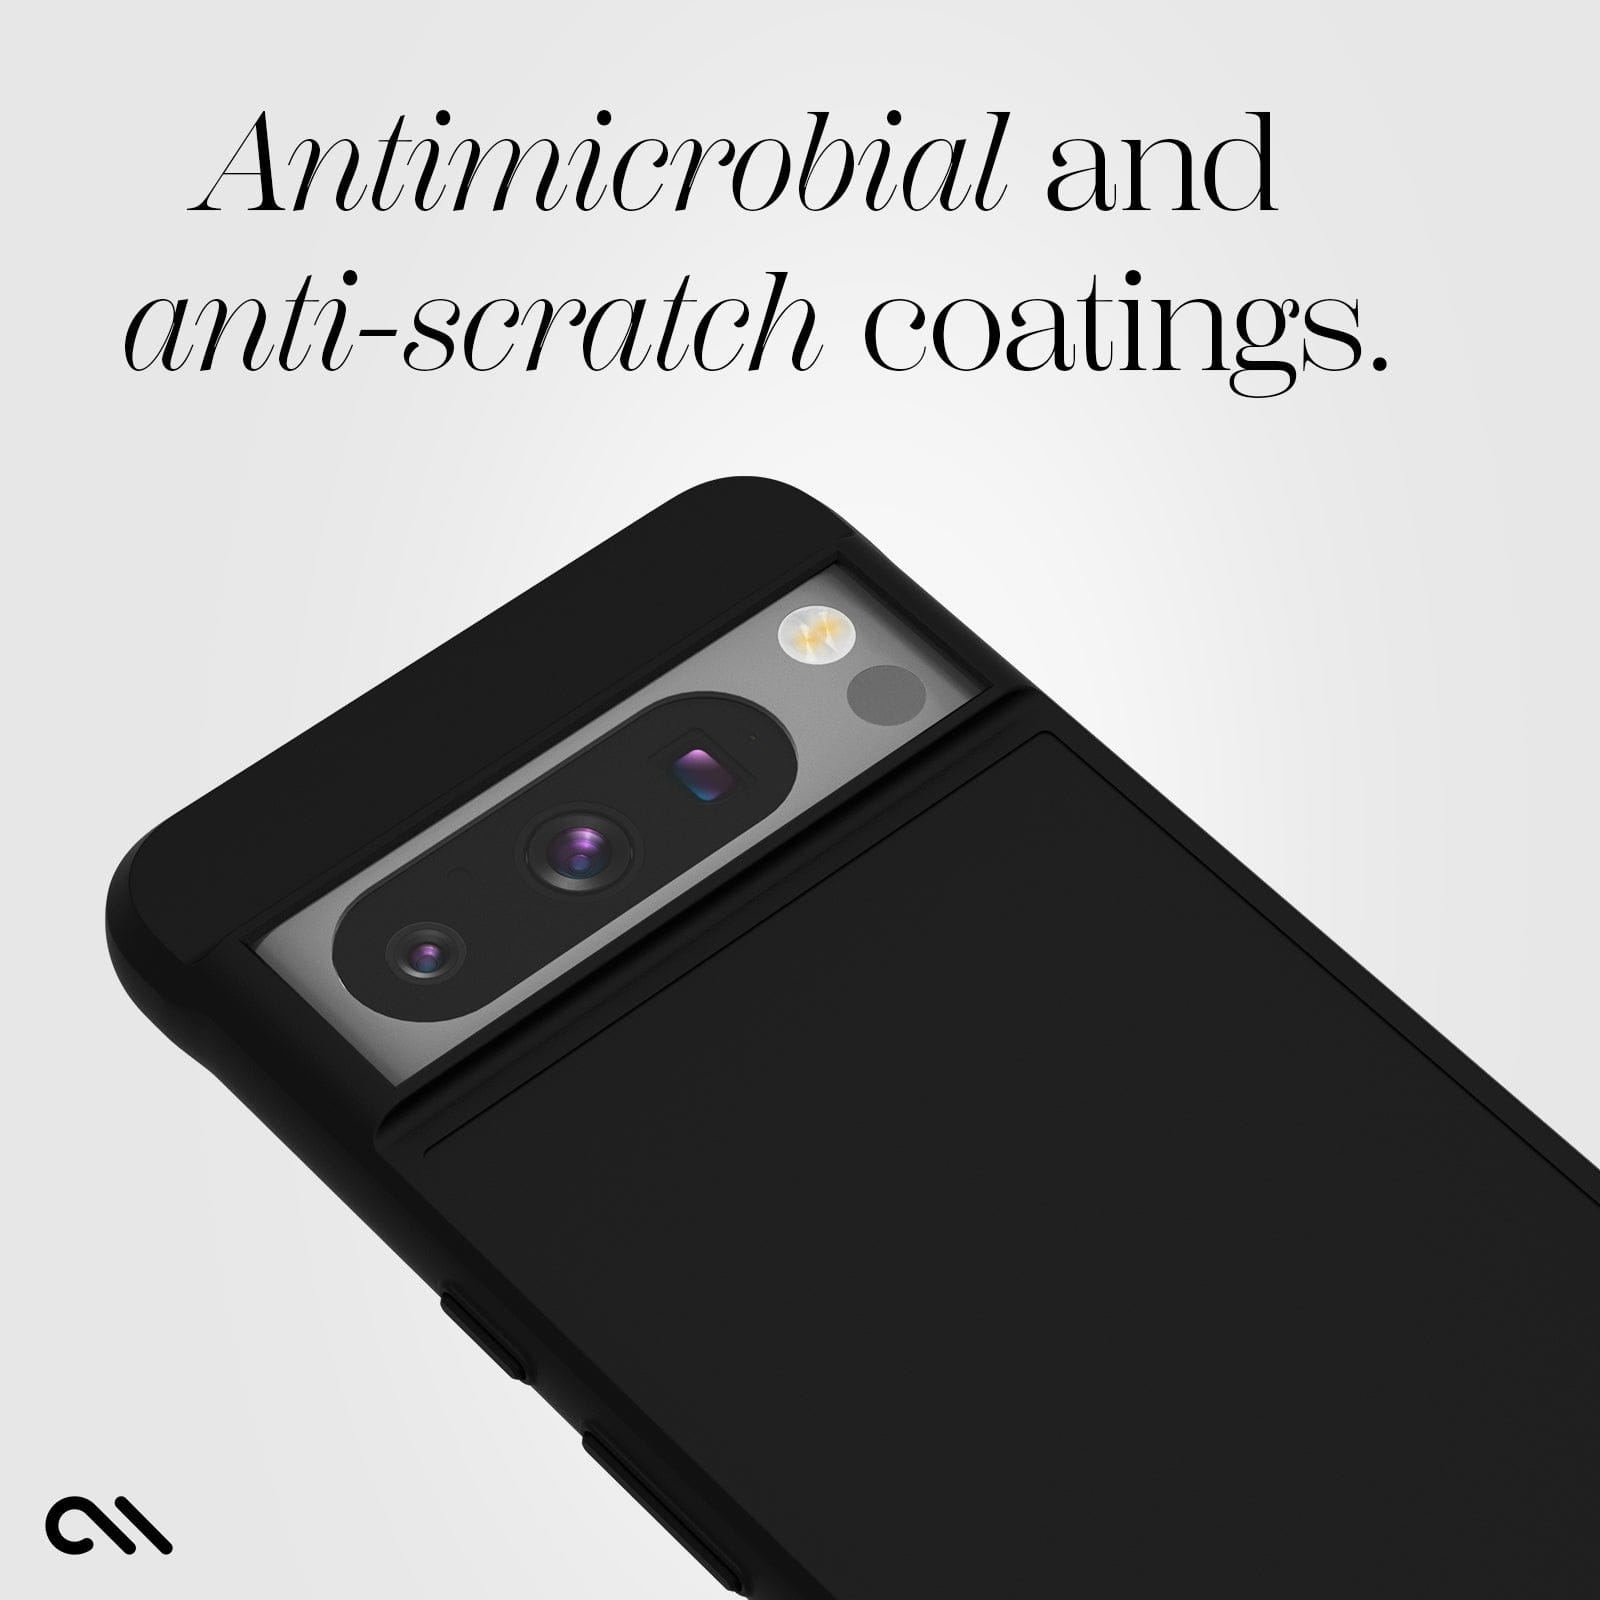 ANTIMICROBIAL AND ANTISCRATCH COATINGS